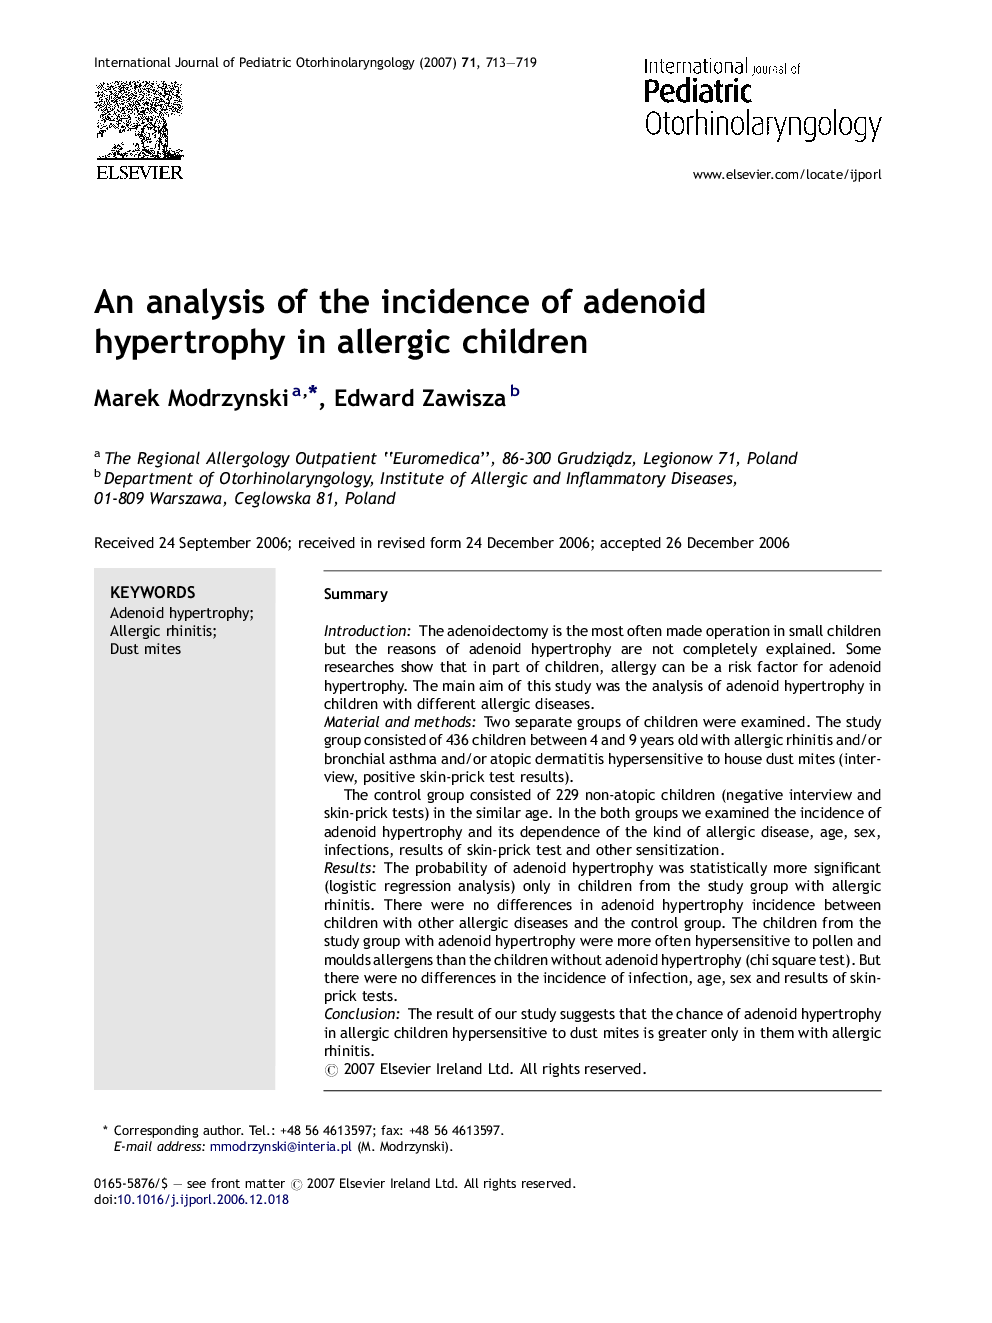 An analysis of the incidence of adenoid hypertrophy in allergic children